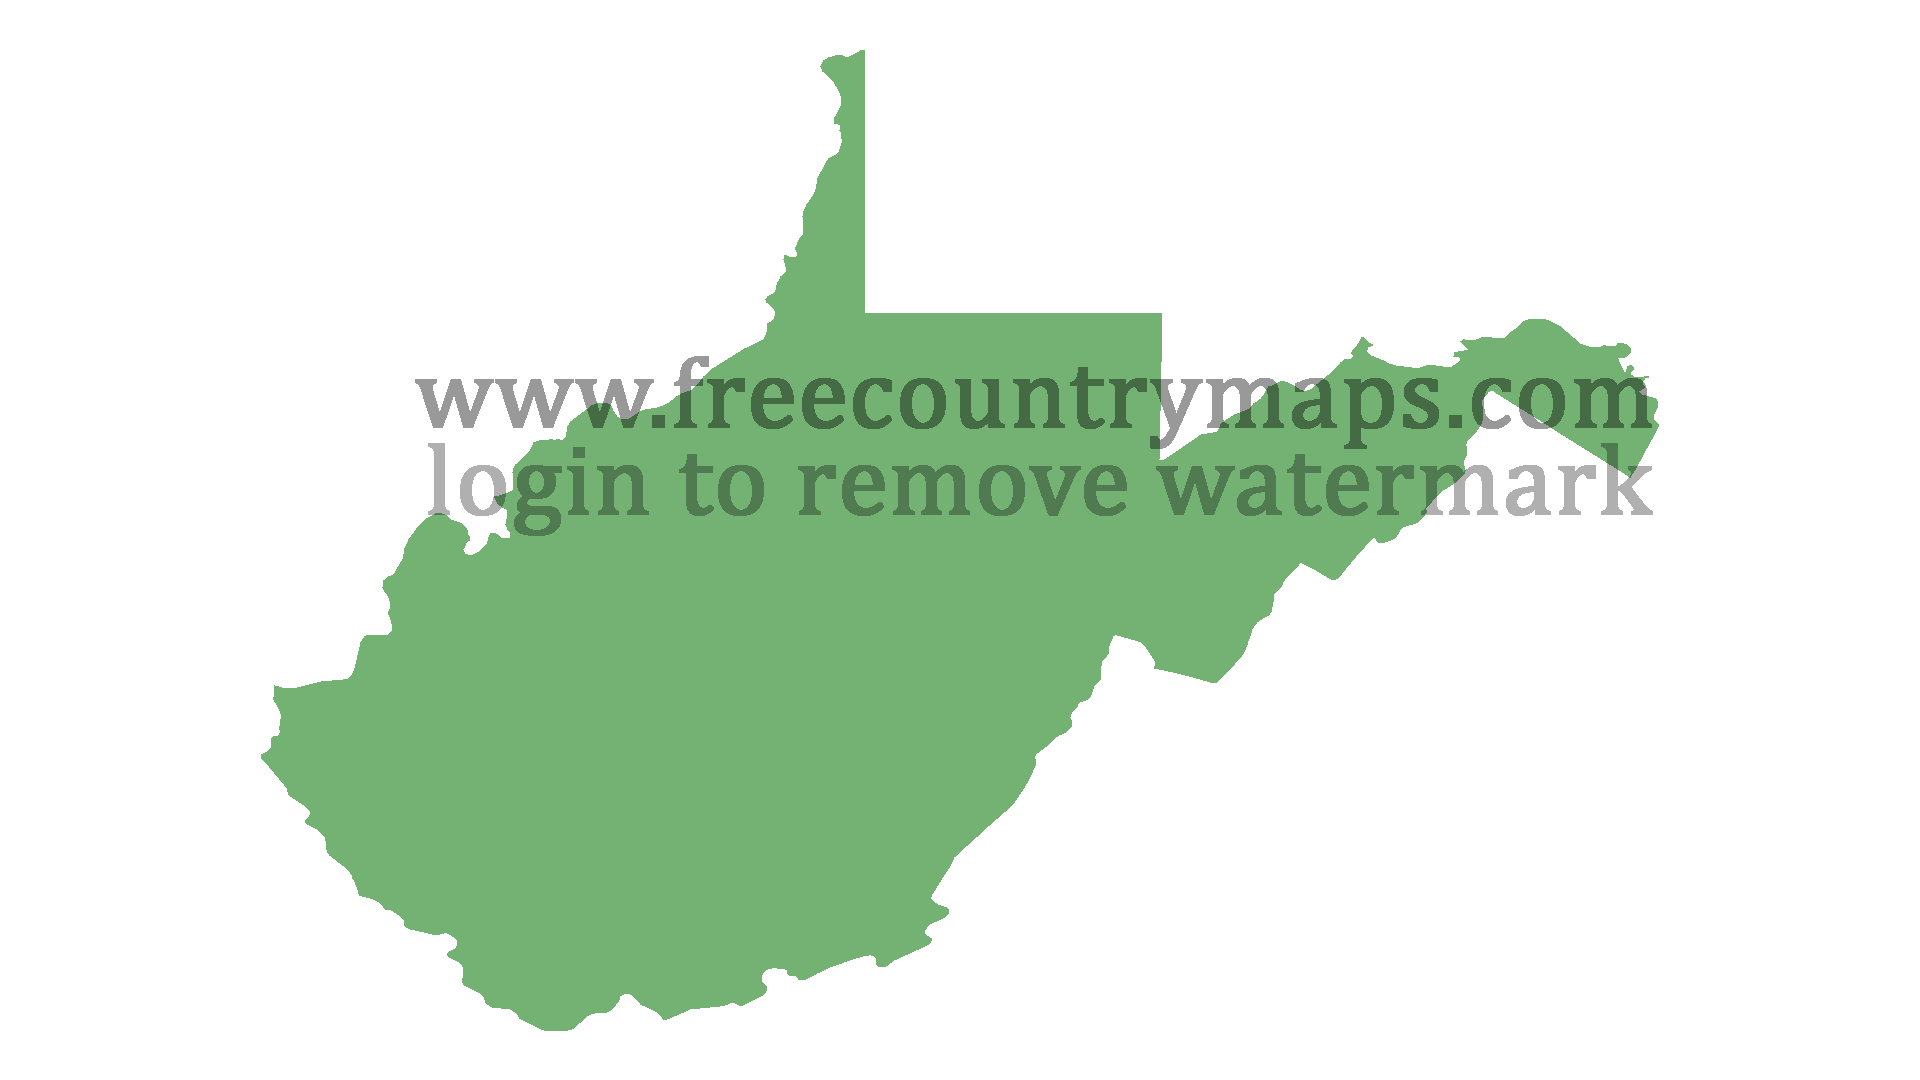 Blank Map of the State of West Virginia in 1080p